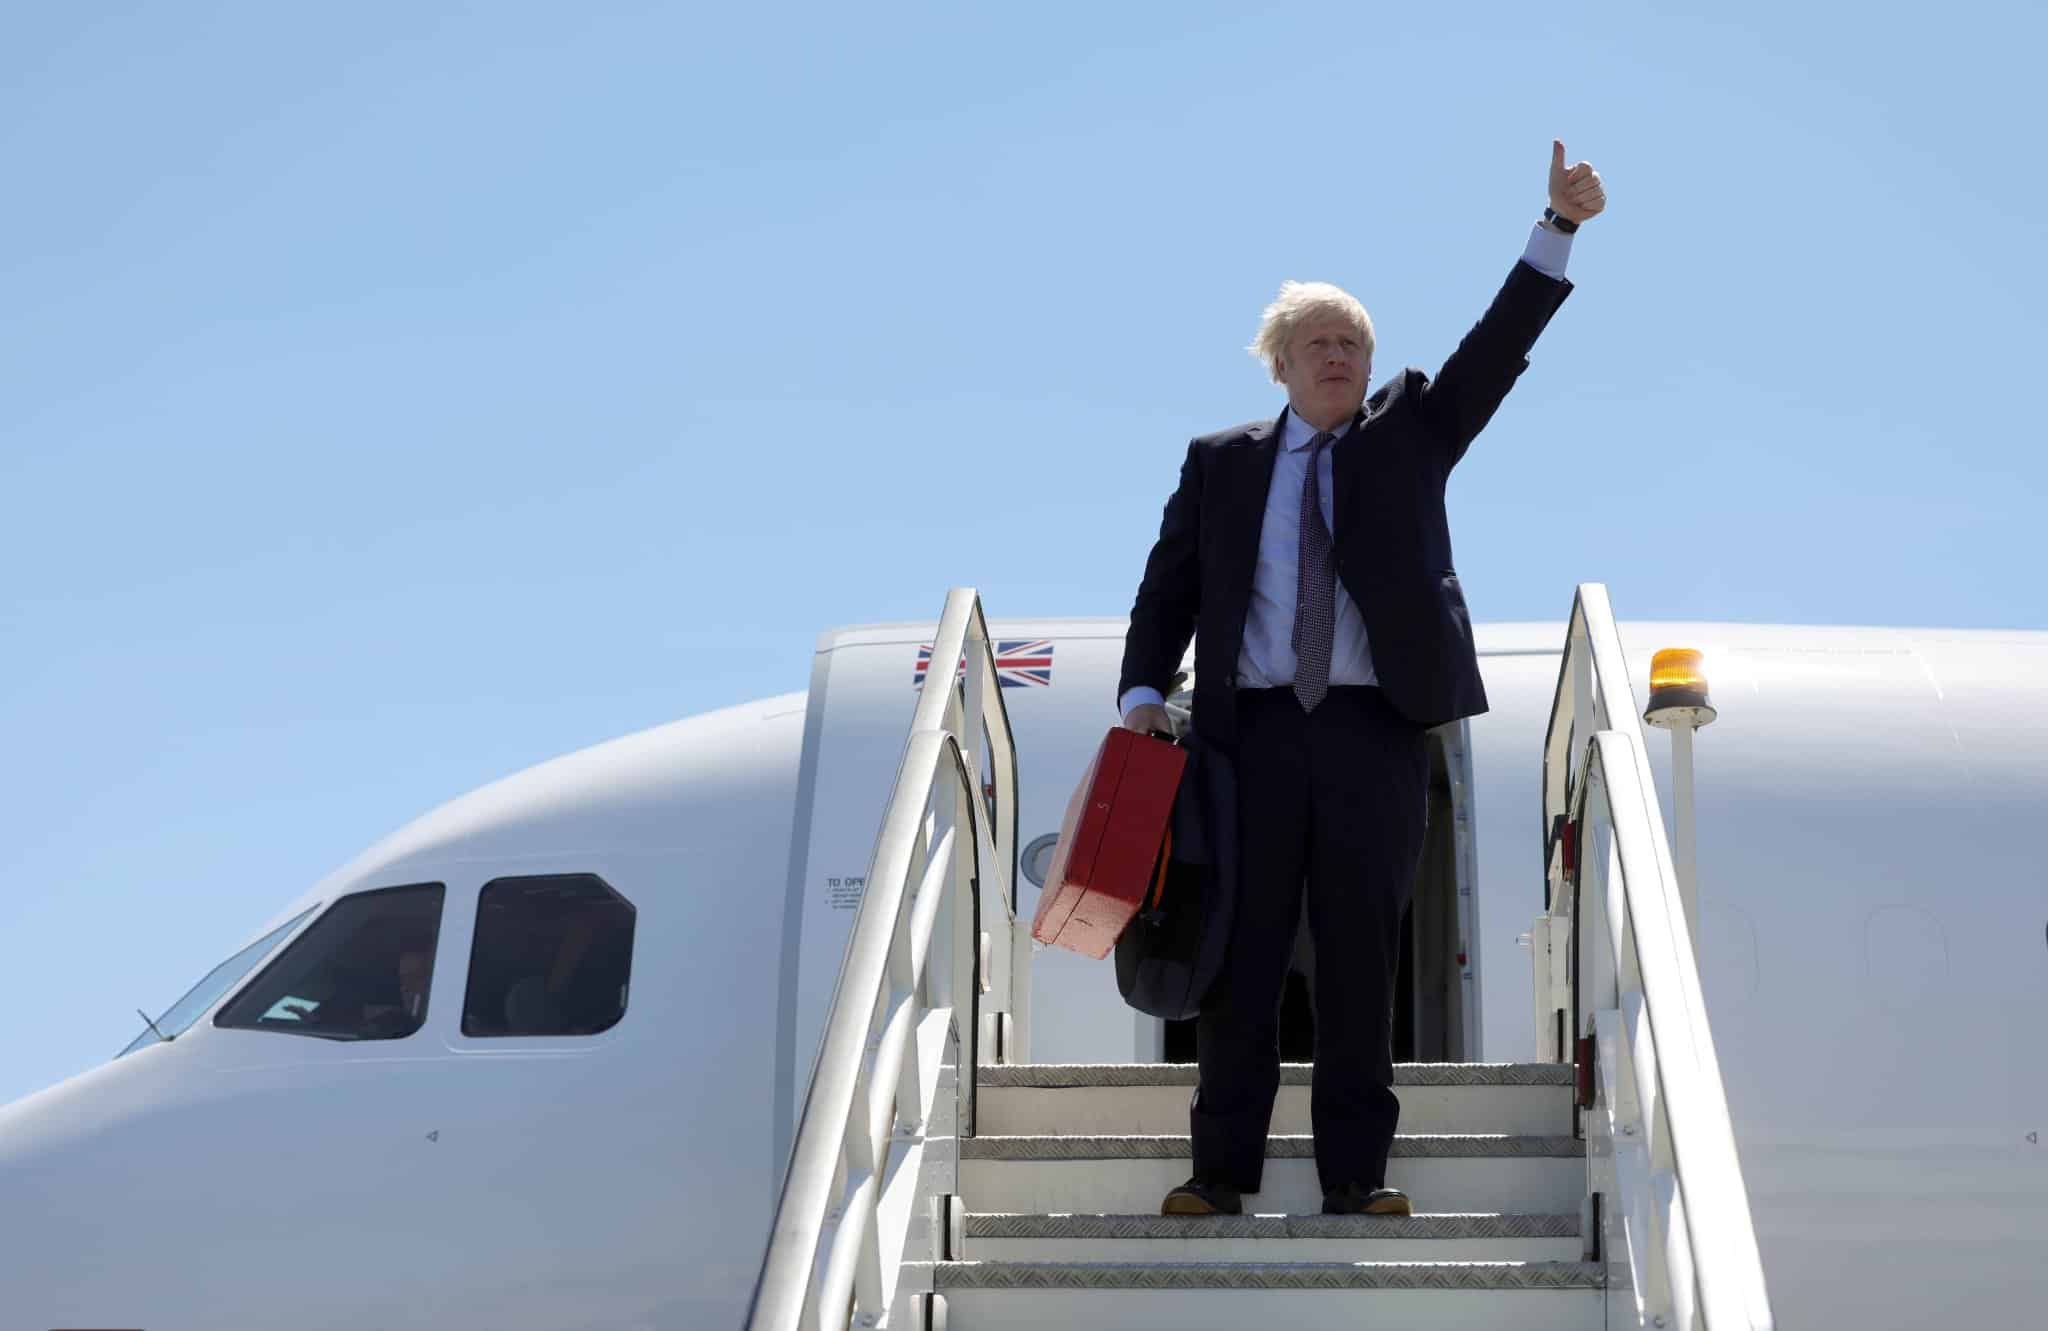 Boris flew to ‘levelling up’ speech on taxpayer-funded private jet